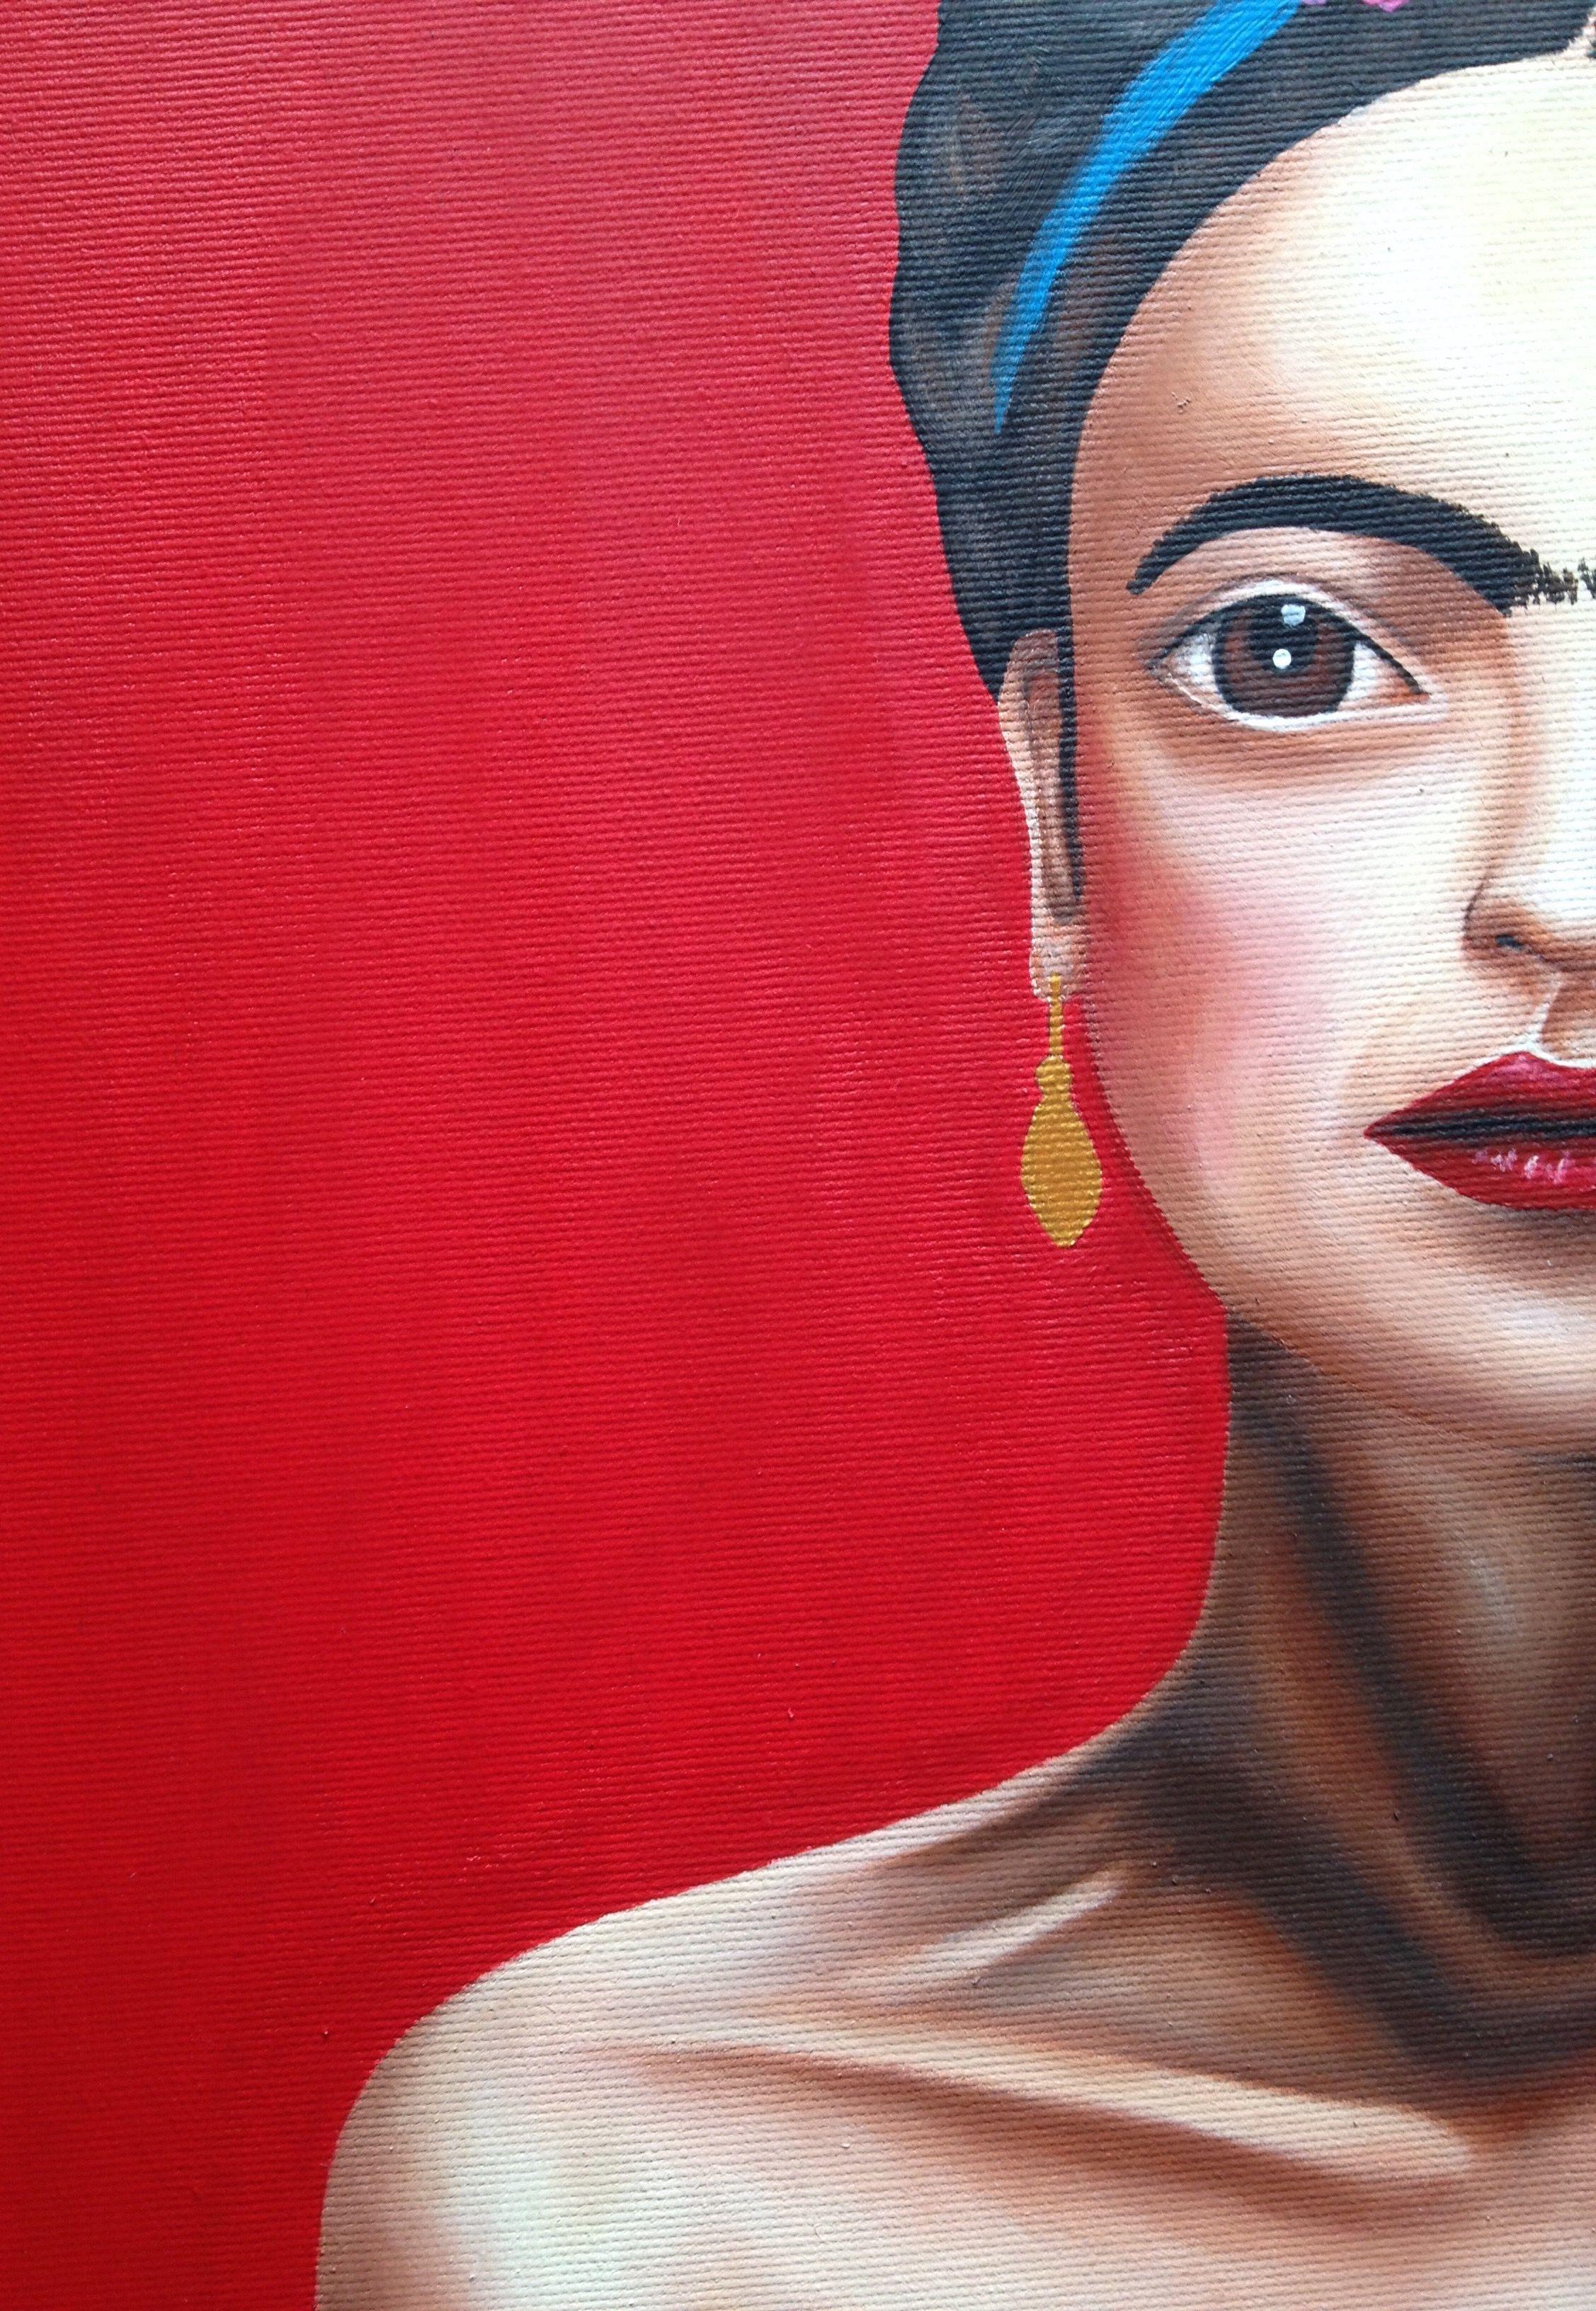 FRIDA KAHLO, Painting, Watercolor on Canvas - Contemporary Art by Christina Bilbili